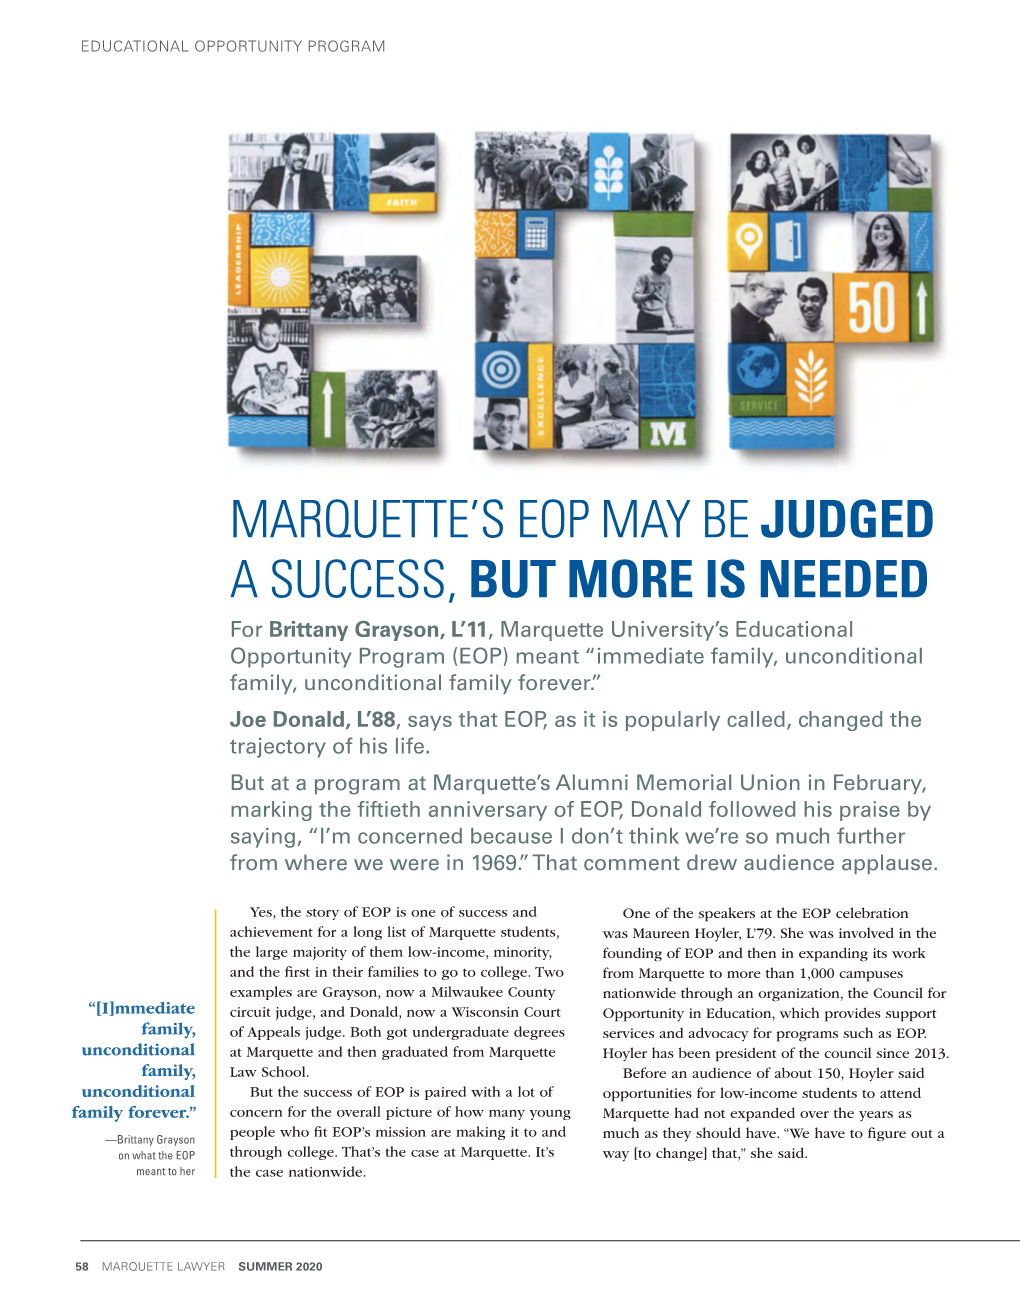 Marquette's Eop May Be Judged a Success, but More